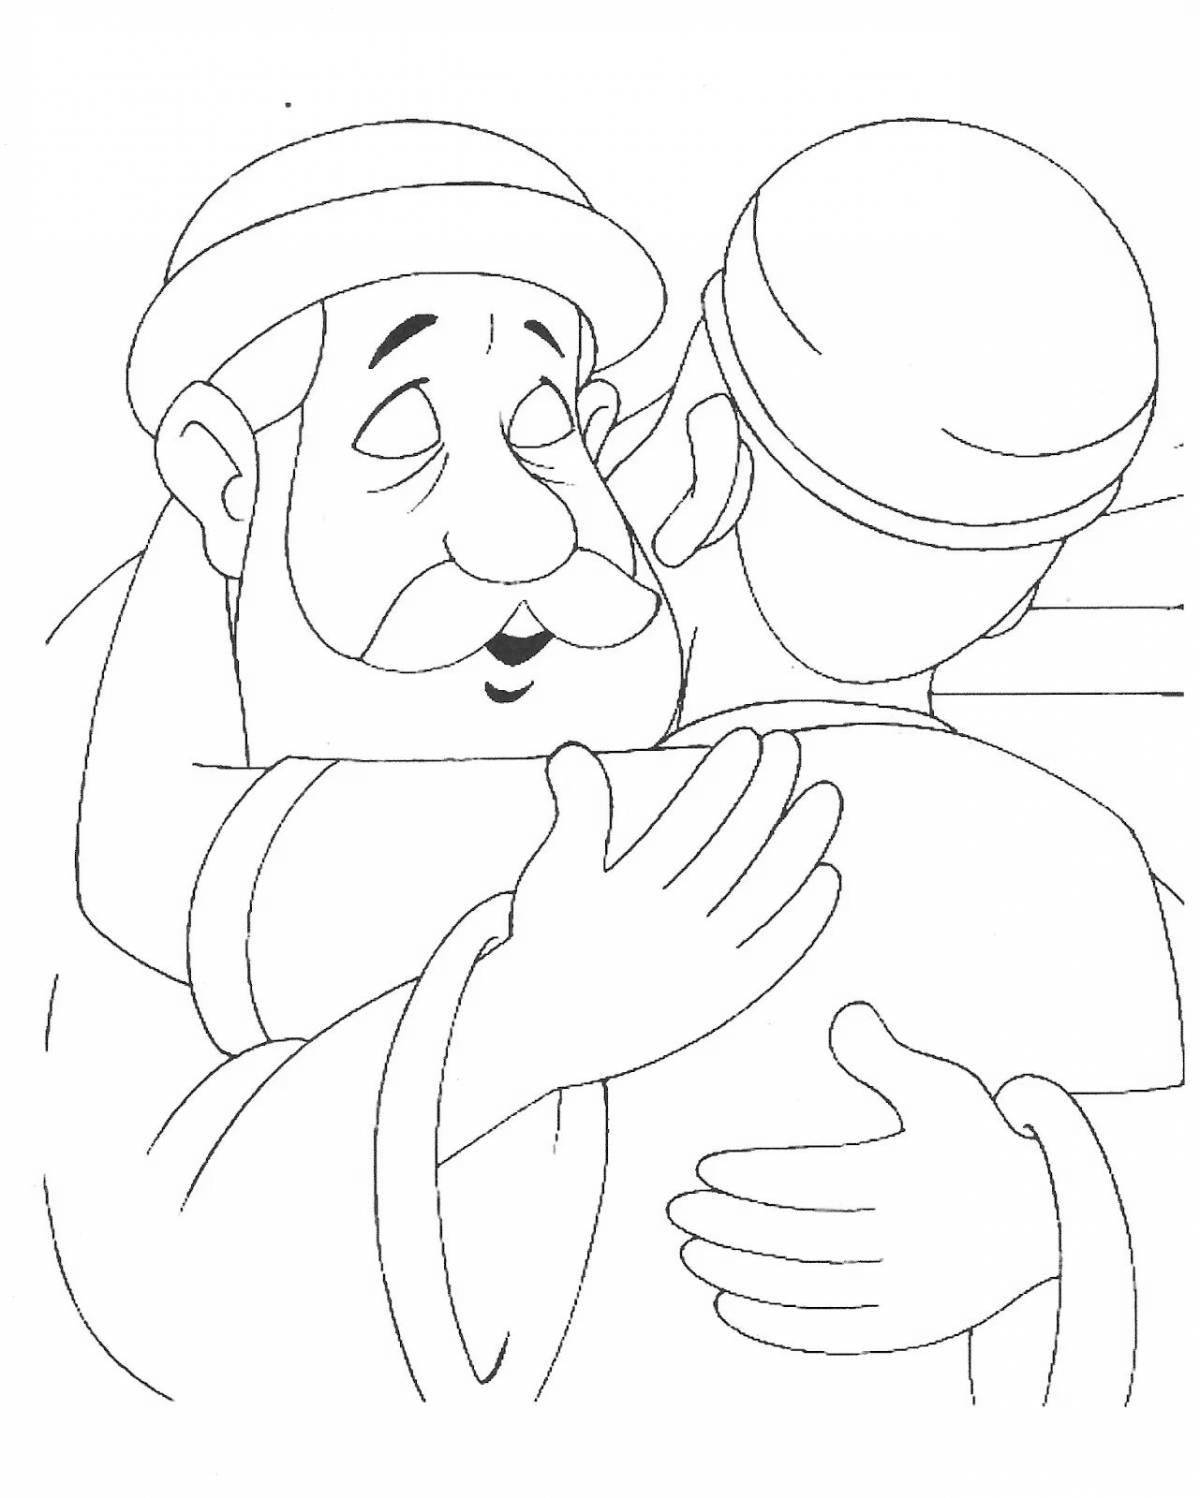 Coloring page of the week of the violent prodigal son